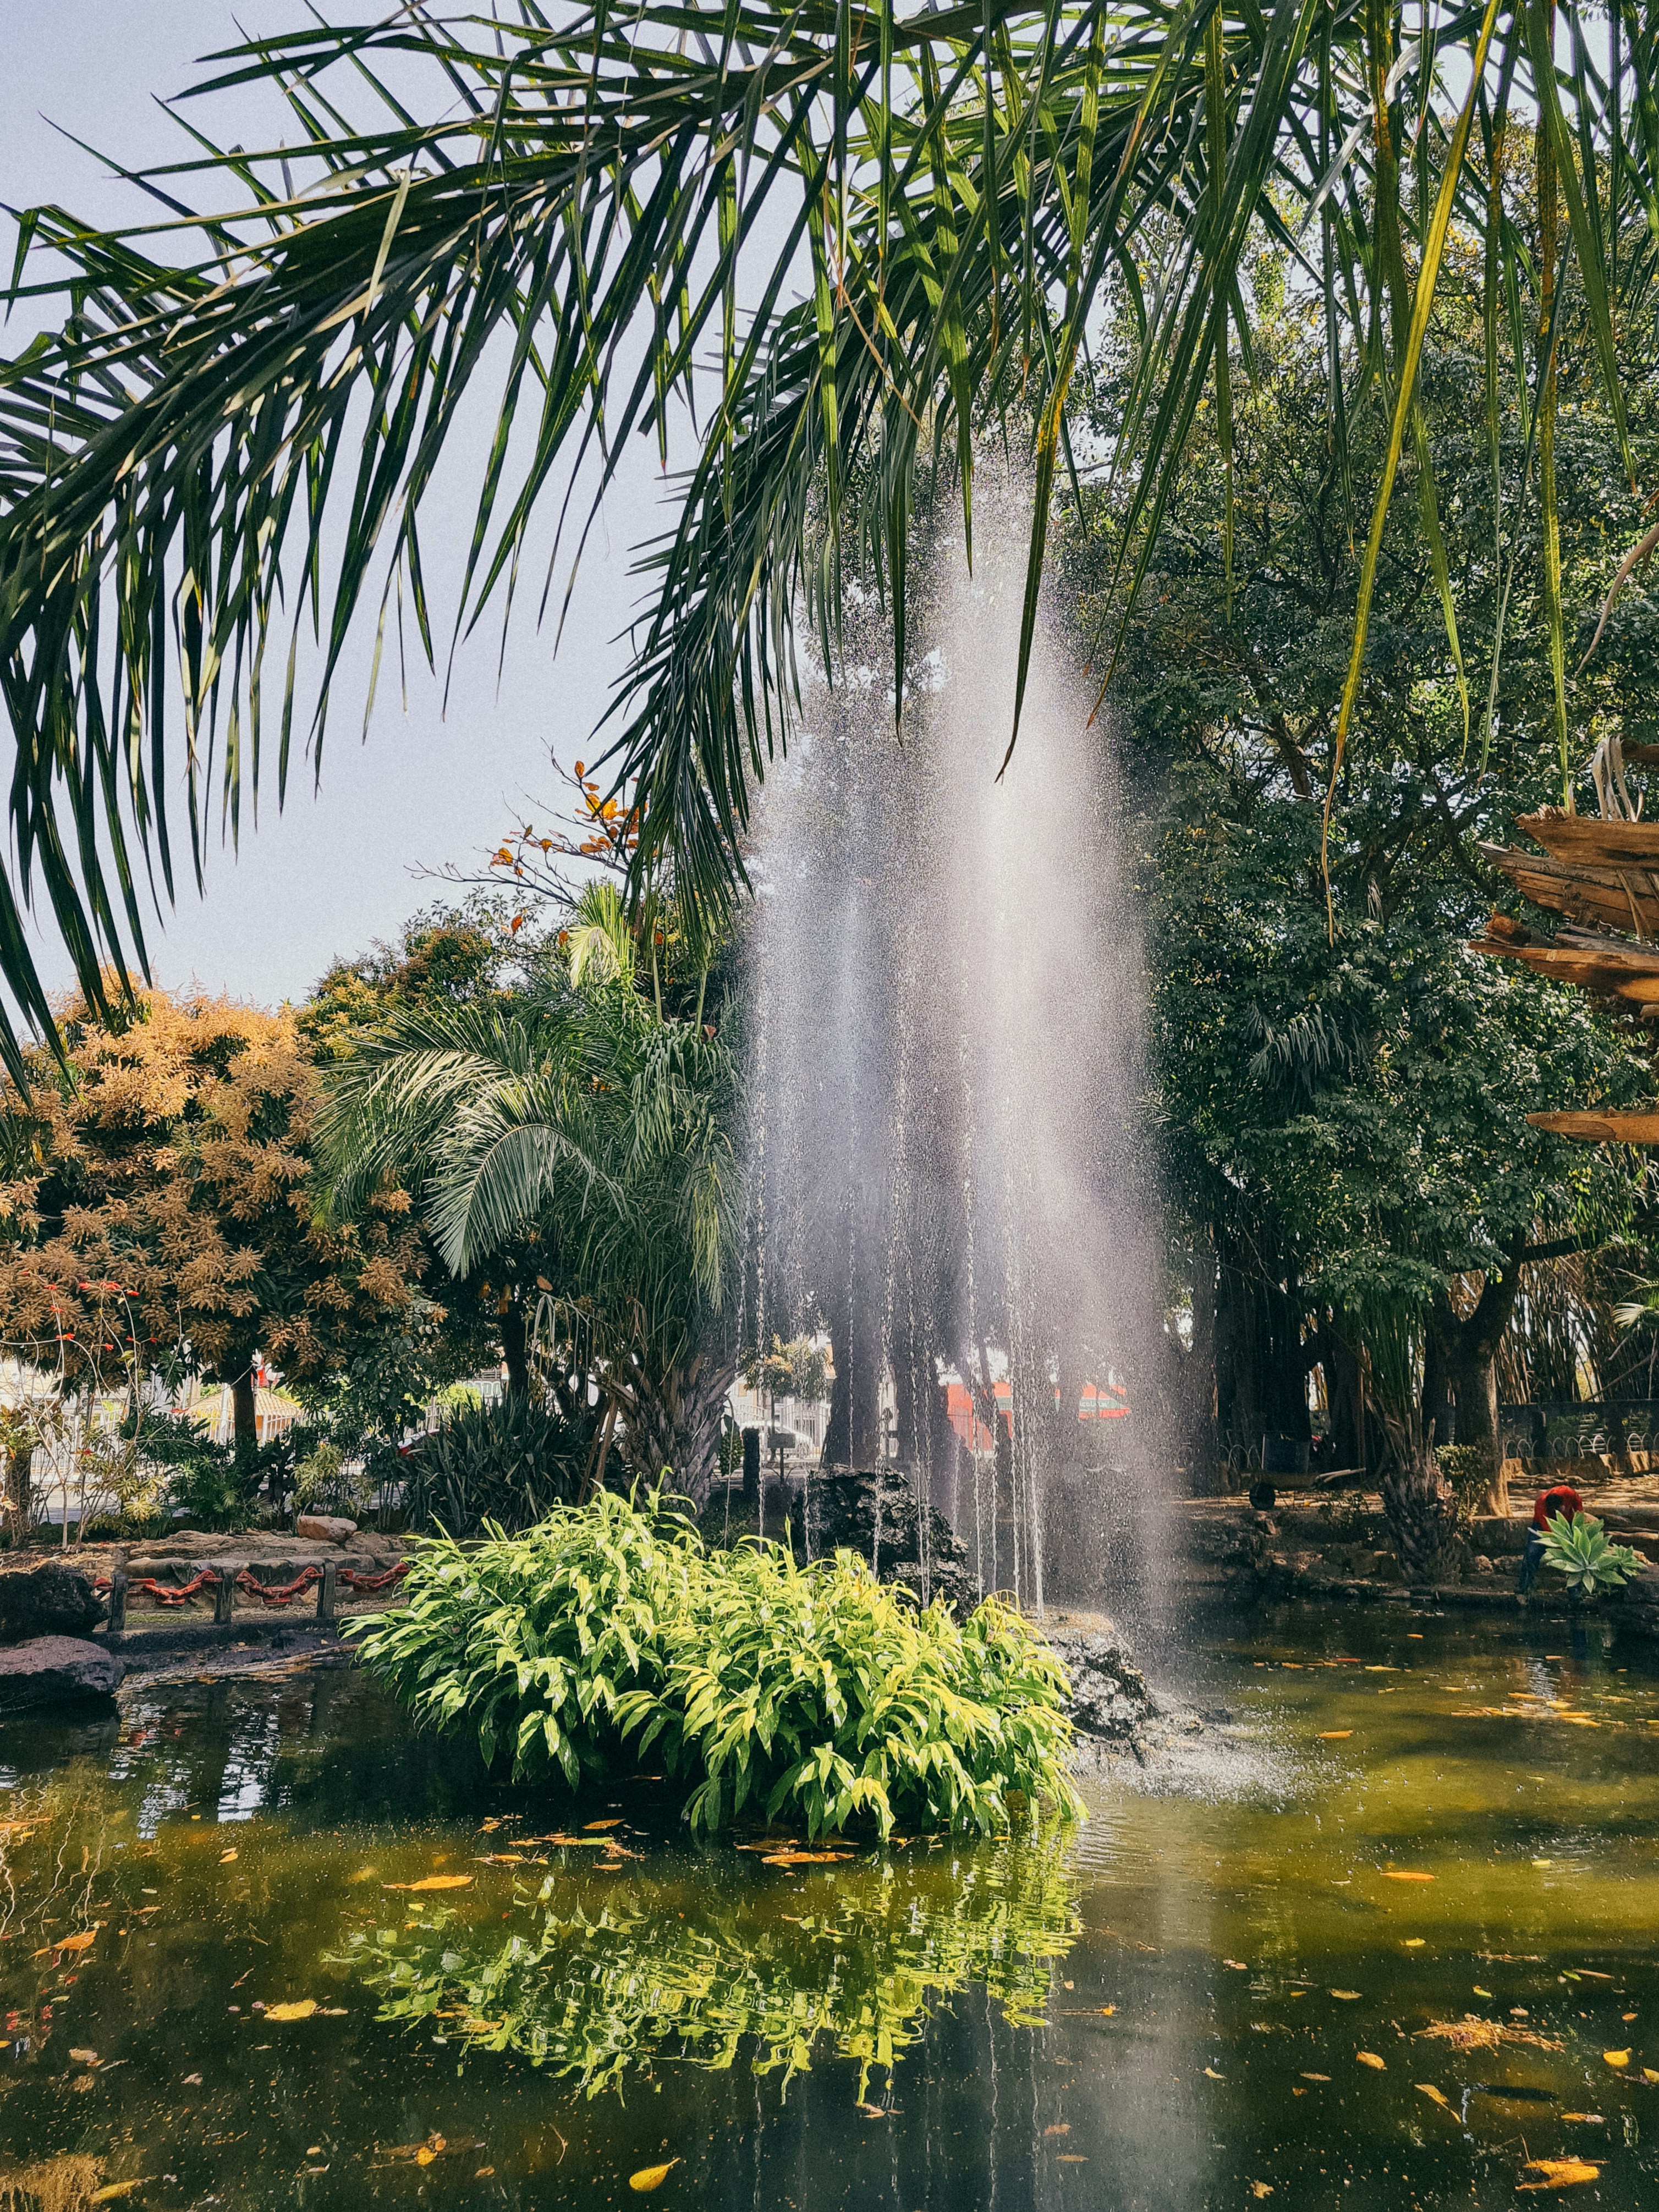 water fountain in the middle of green palm trees